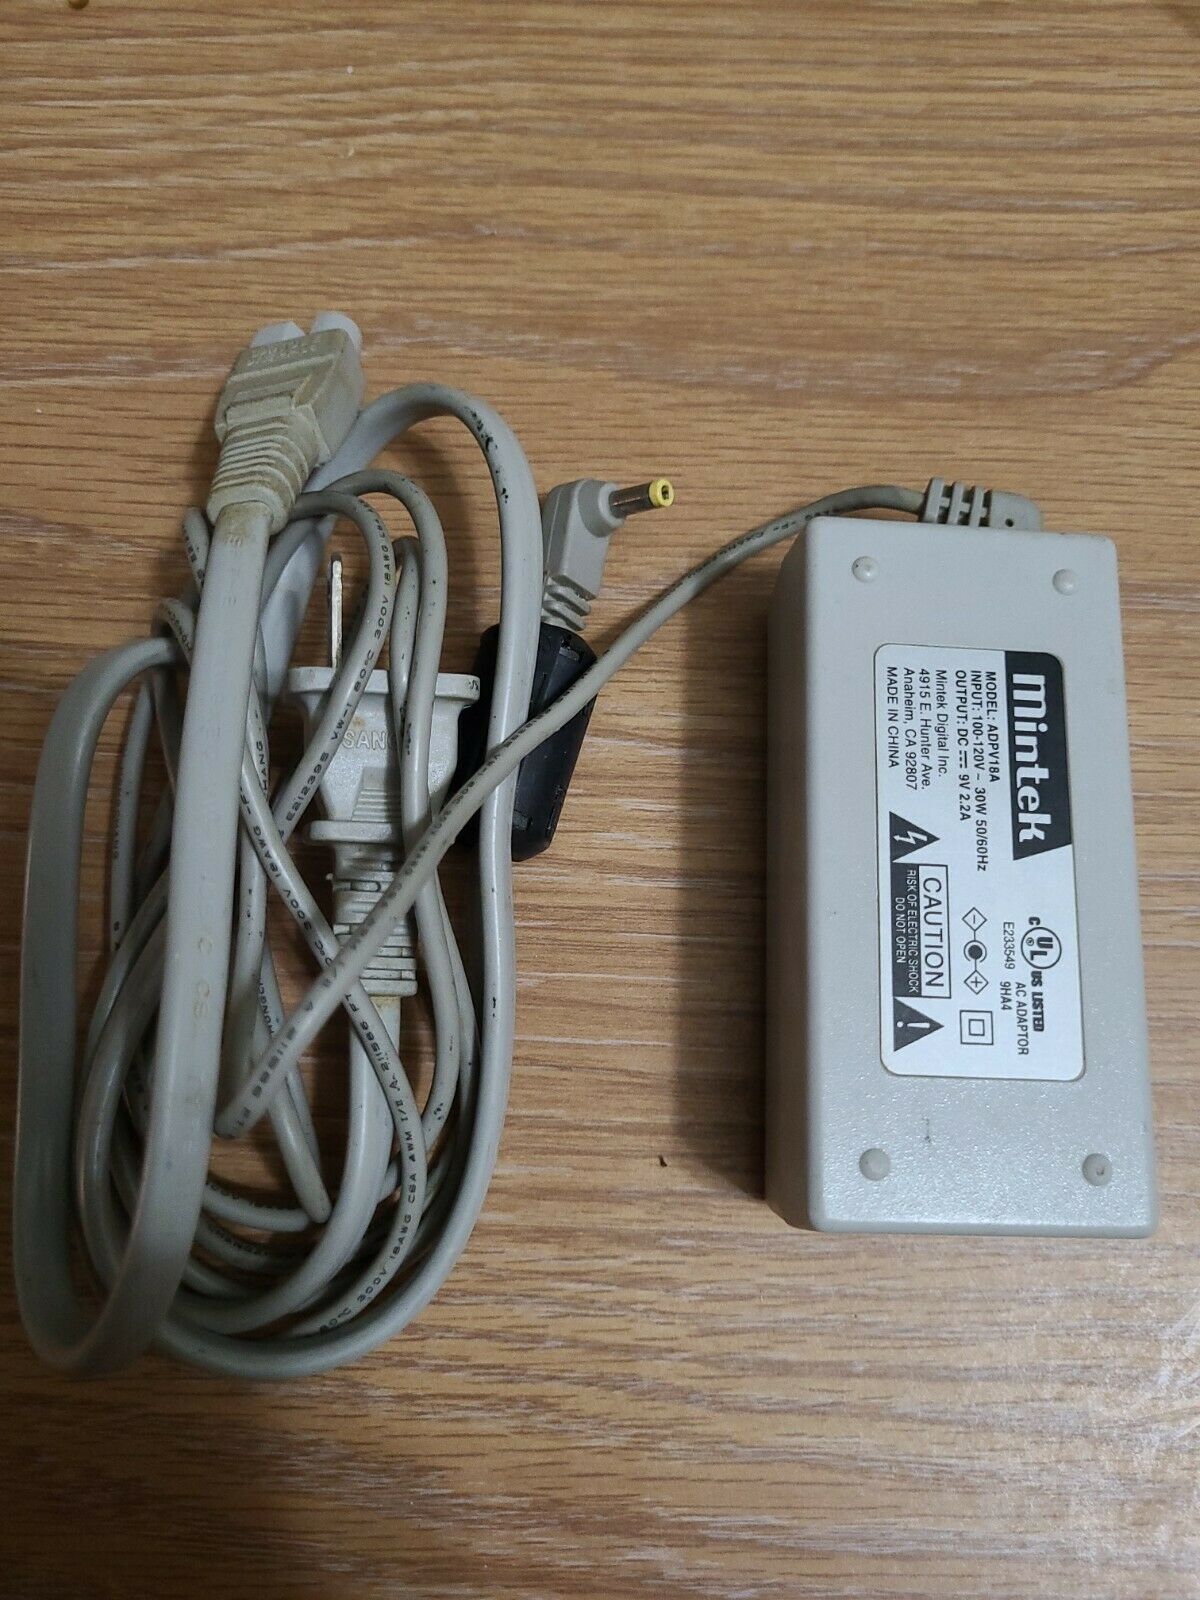 Original MINTEK AC Adapter Charger ADPV18A DVD Player Power Cord 9V 2.2A Genuine Connection Split/Duplication: 1:8 T